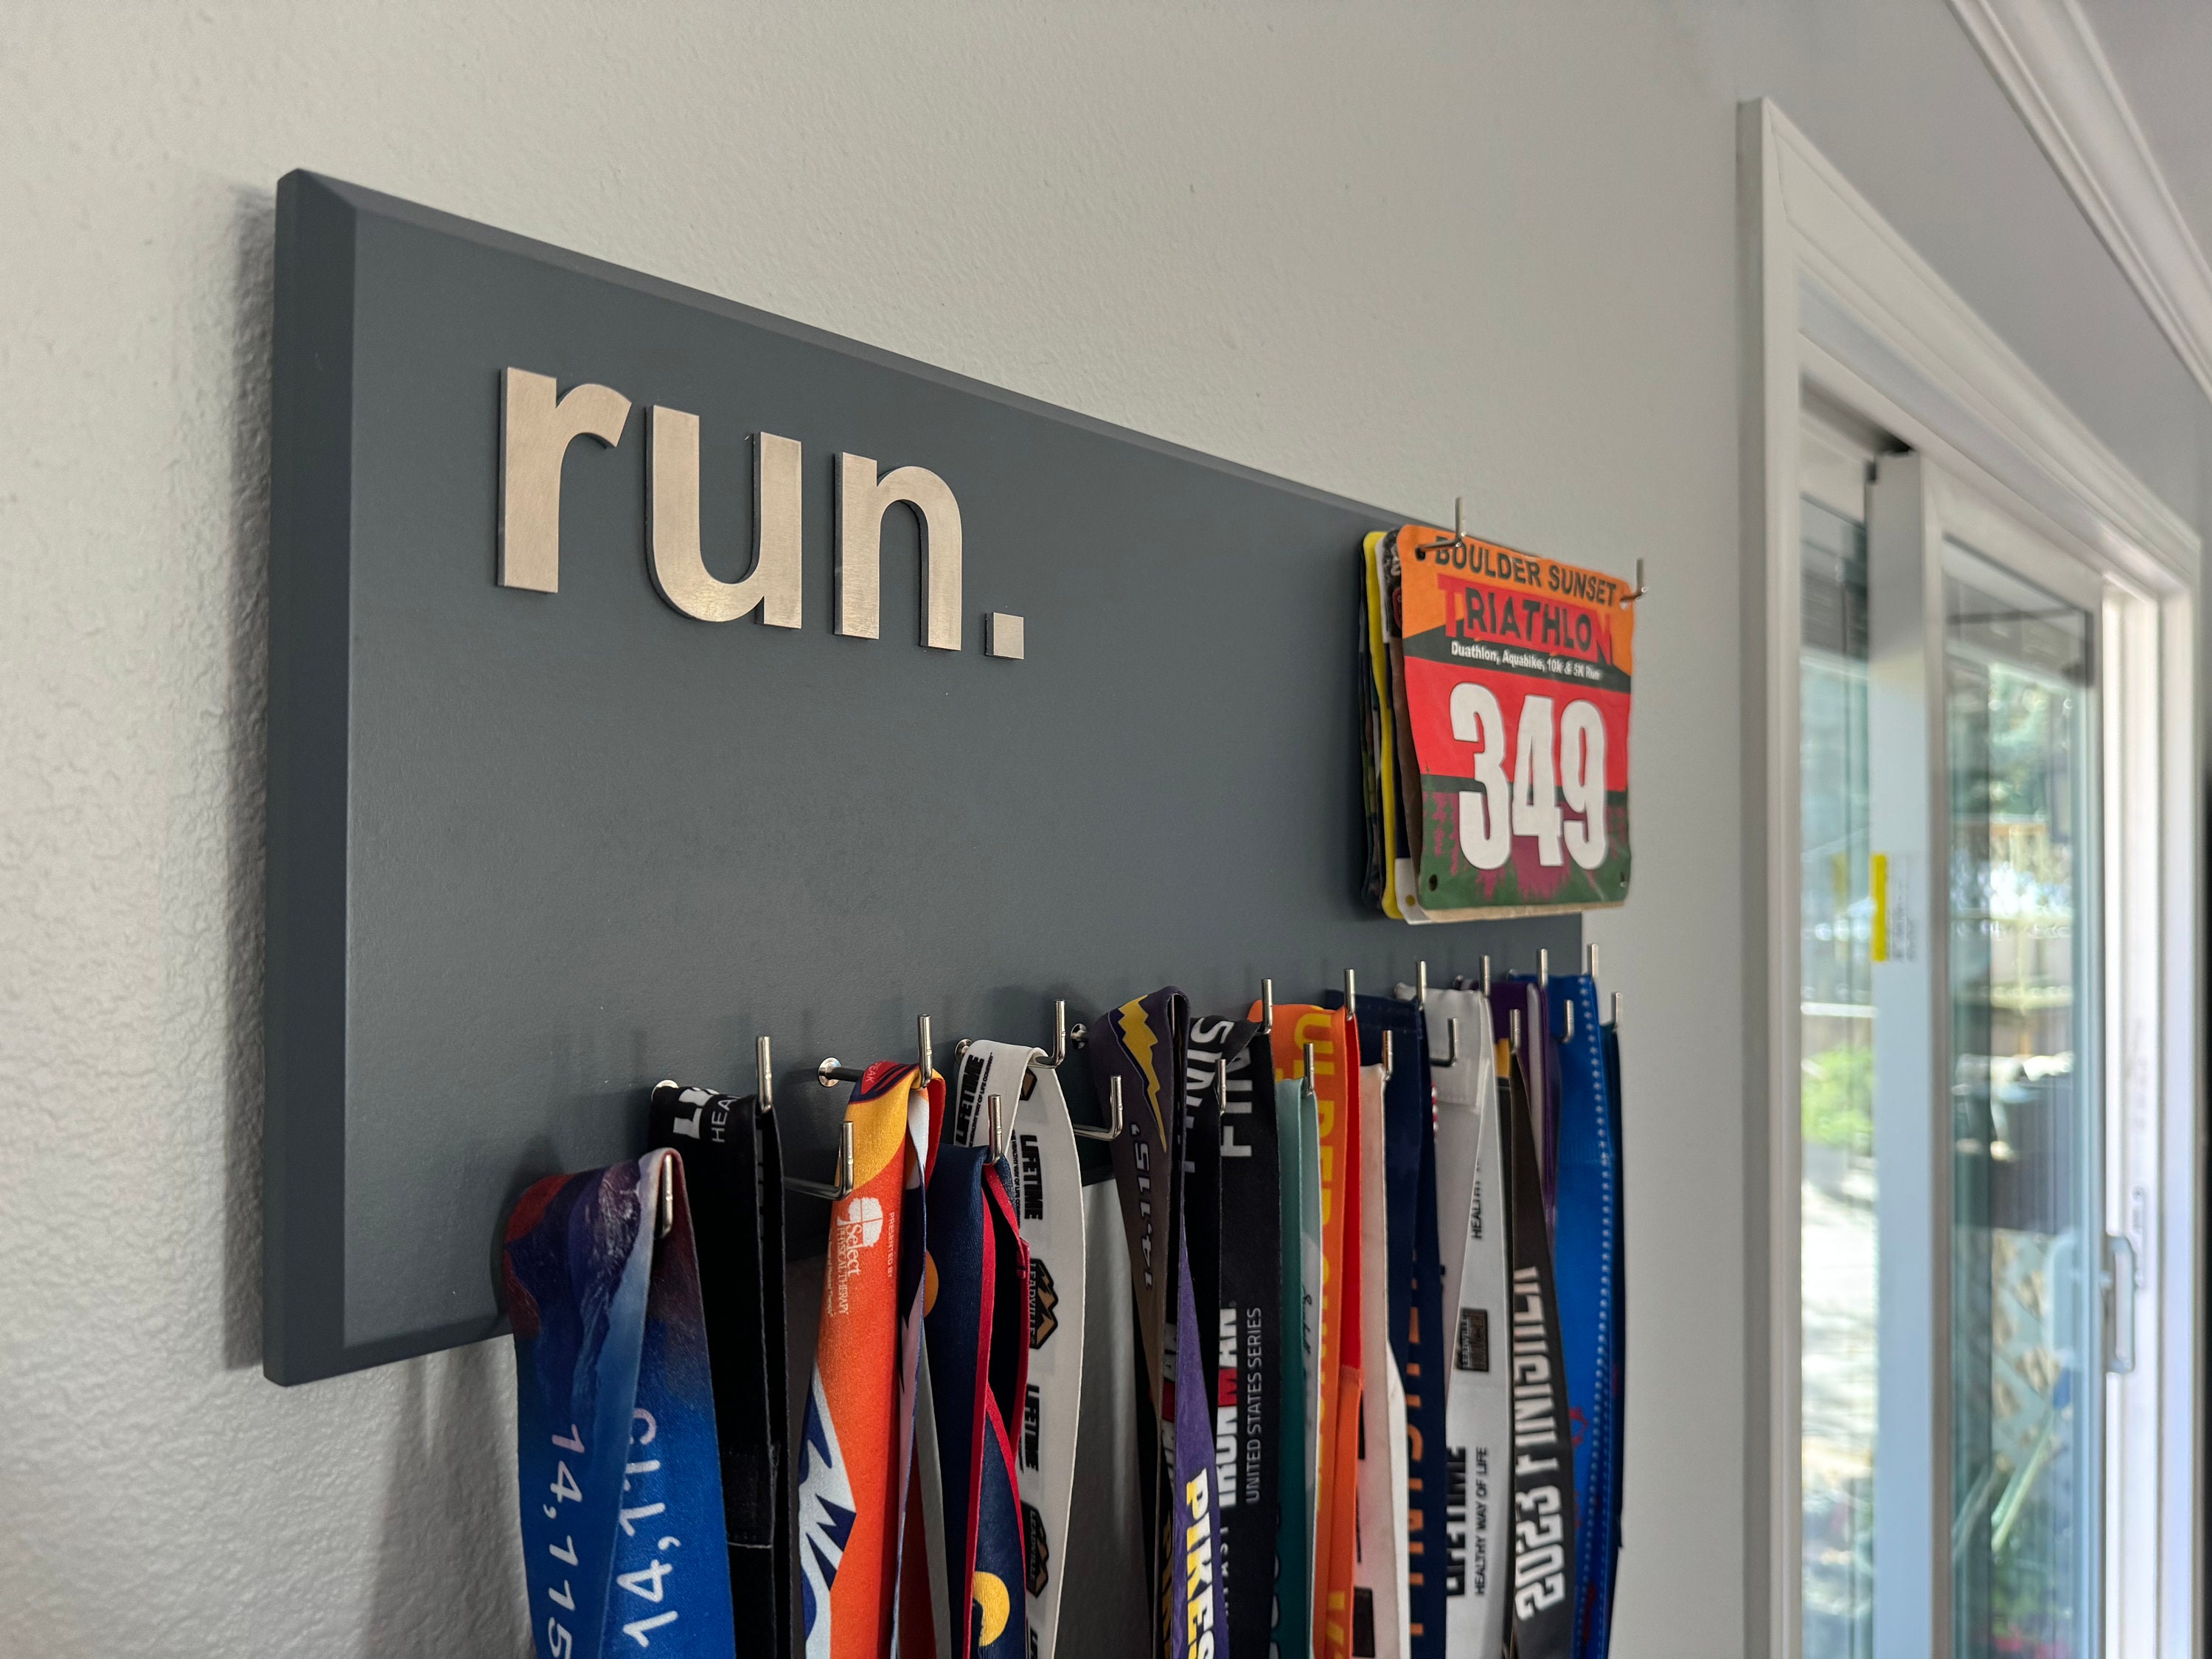 Once Upon a Run - Race Bib Display Holder - SportHooks by JDHirondesigns